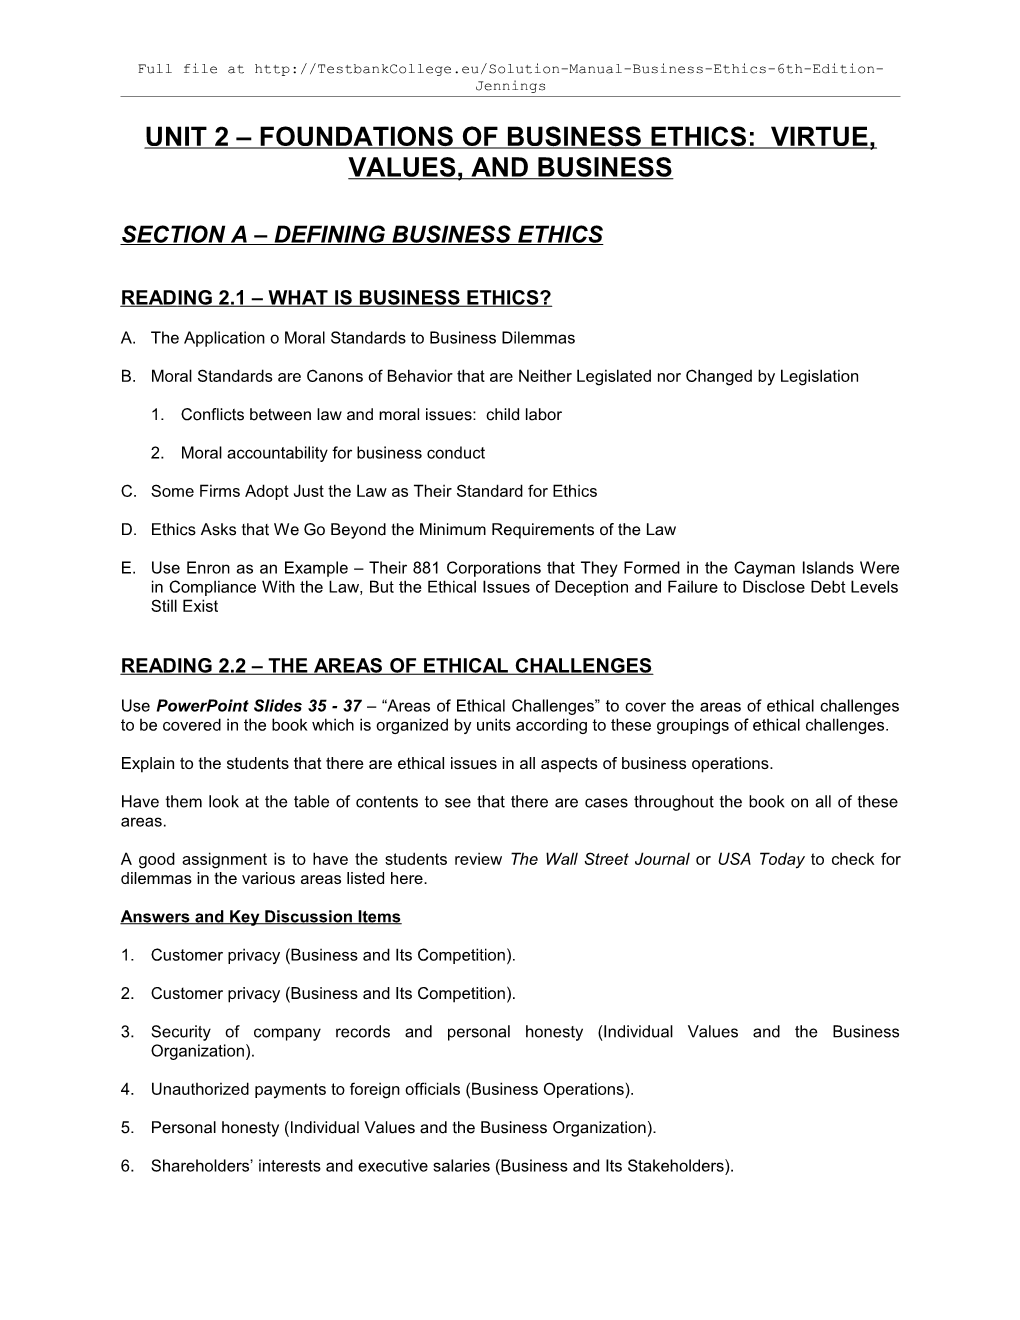 Unit 2 Foundations of Business Ethics: Virtue, Values, and Business s1